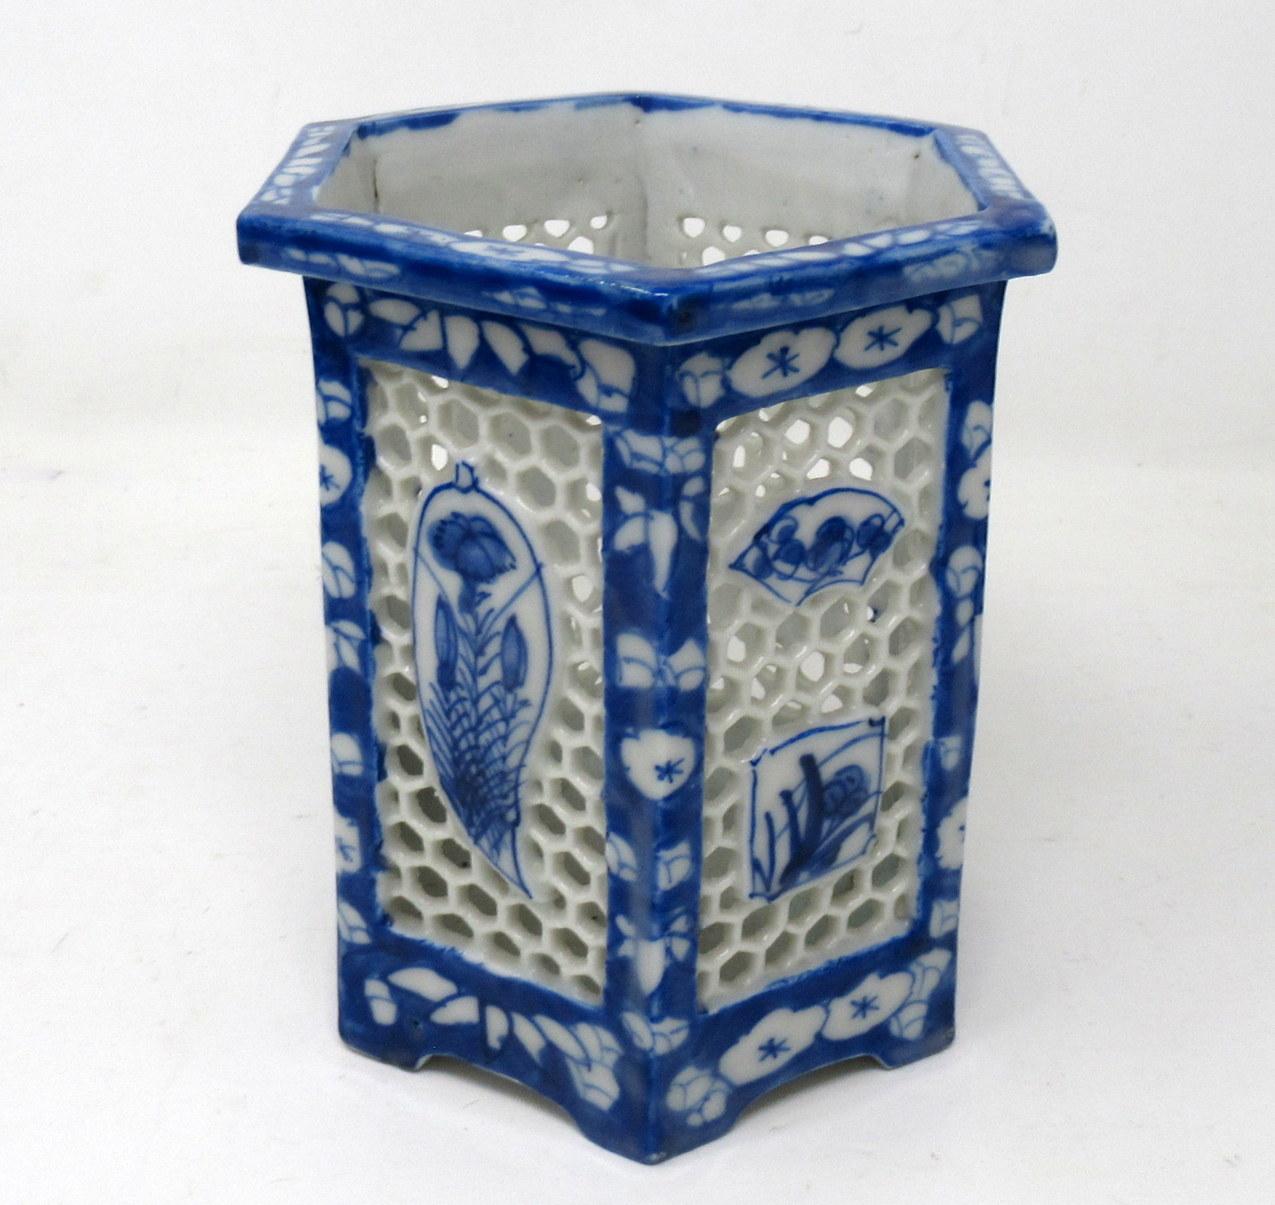 Ceramic Hand Painted Blue White Japanese Chinese Reticulated Hexagonal Porcelain Vases